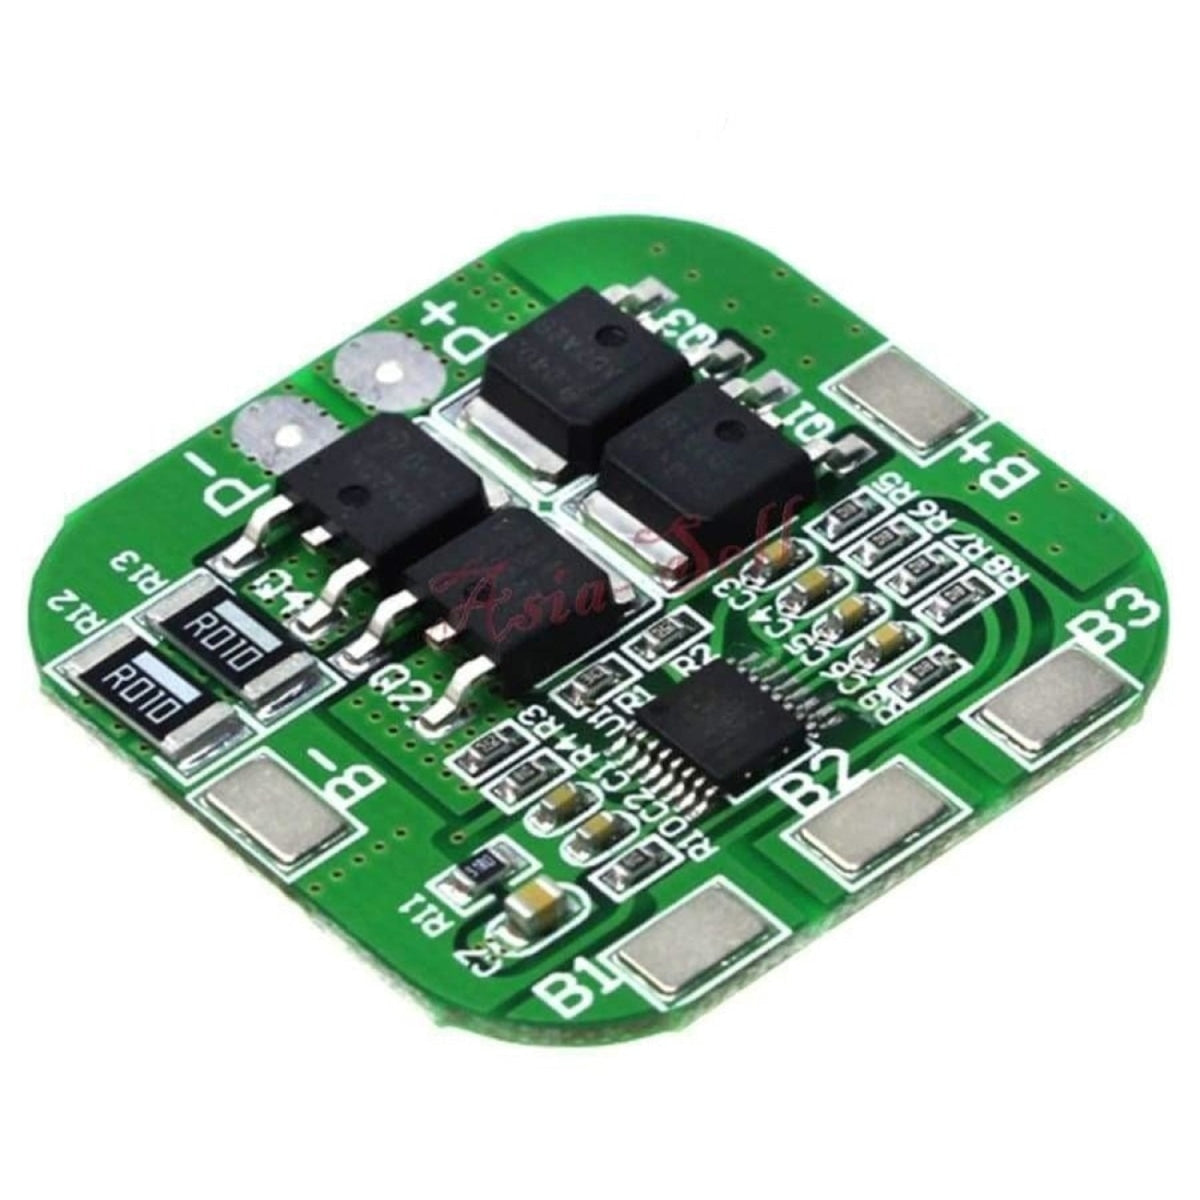 4S 14.8V 16.8V 20A Peak Li-Ion Lithium Battery 18650 Licoo2 Protection Board Bms Charging Boards